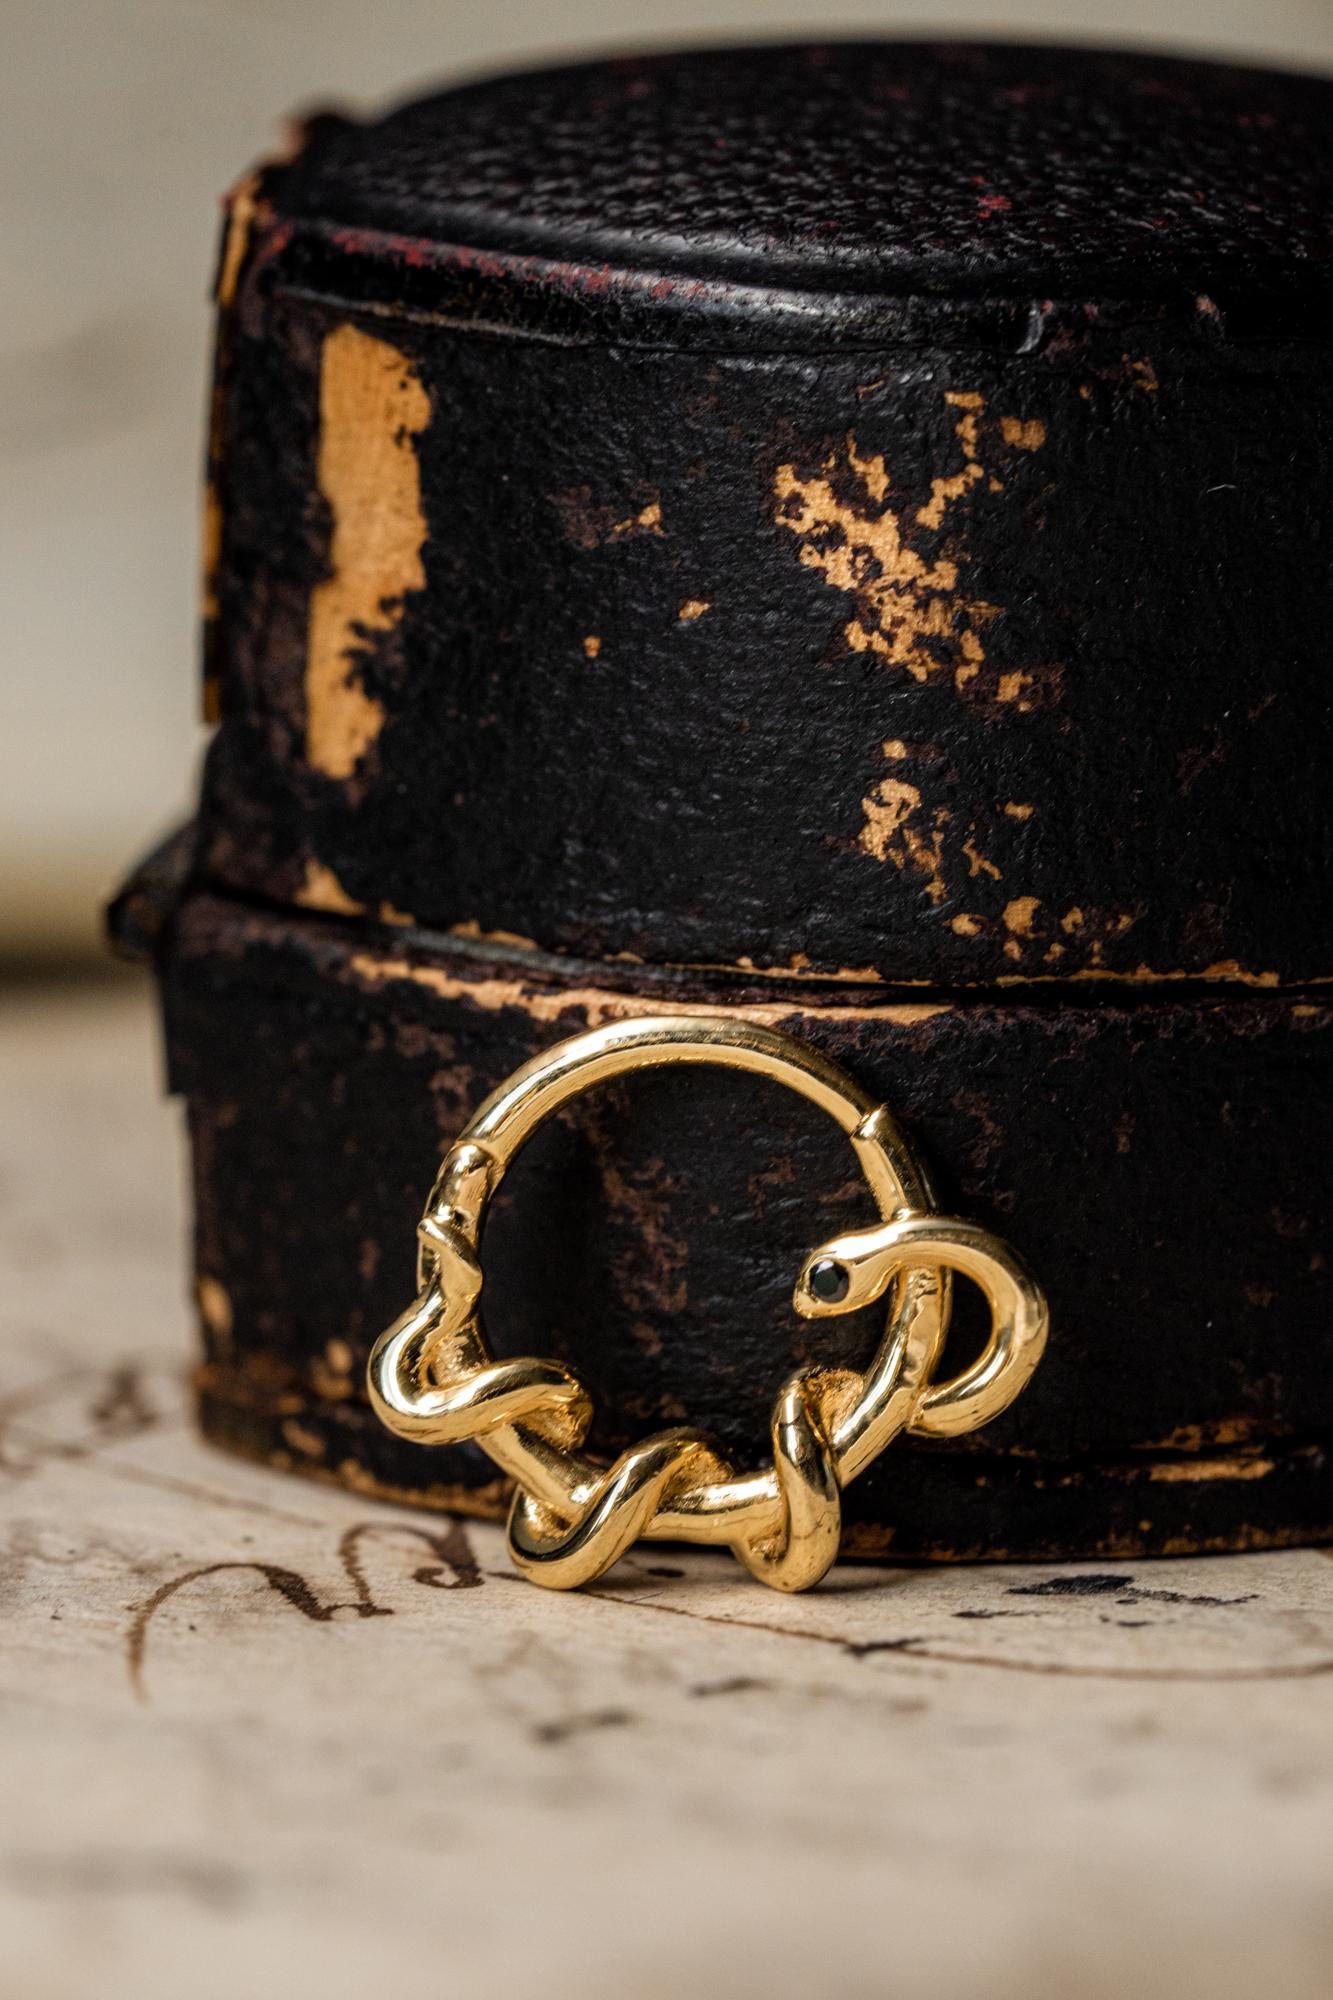 A single black diamond snake earring in solid 14k yellow gold. The earring is set with 0.02 CT black diamond.
Can also be worn as a nose or ear piercing. If you would like to order a pair, please refer to another listing in our shop. 

This listing